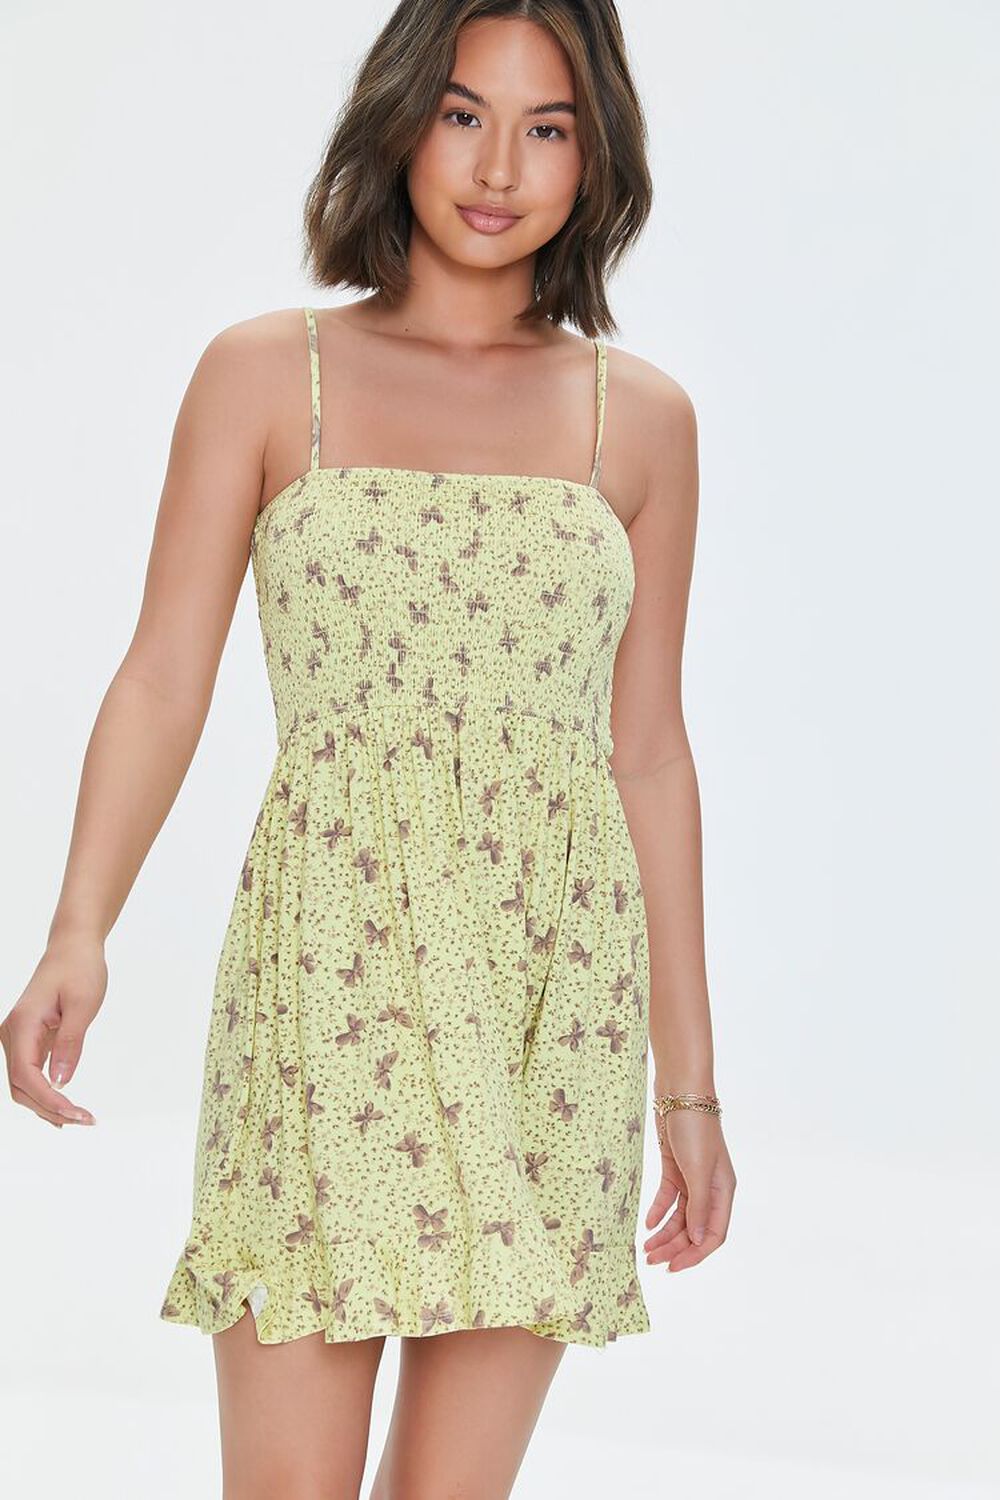 YELLOW/MULTI Butterfly Ditsy Floral Cami Dress, image 1